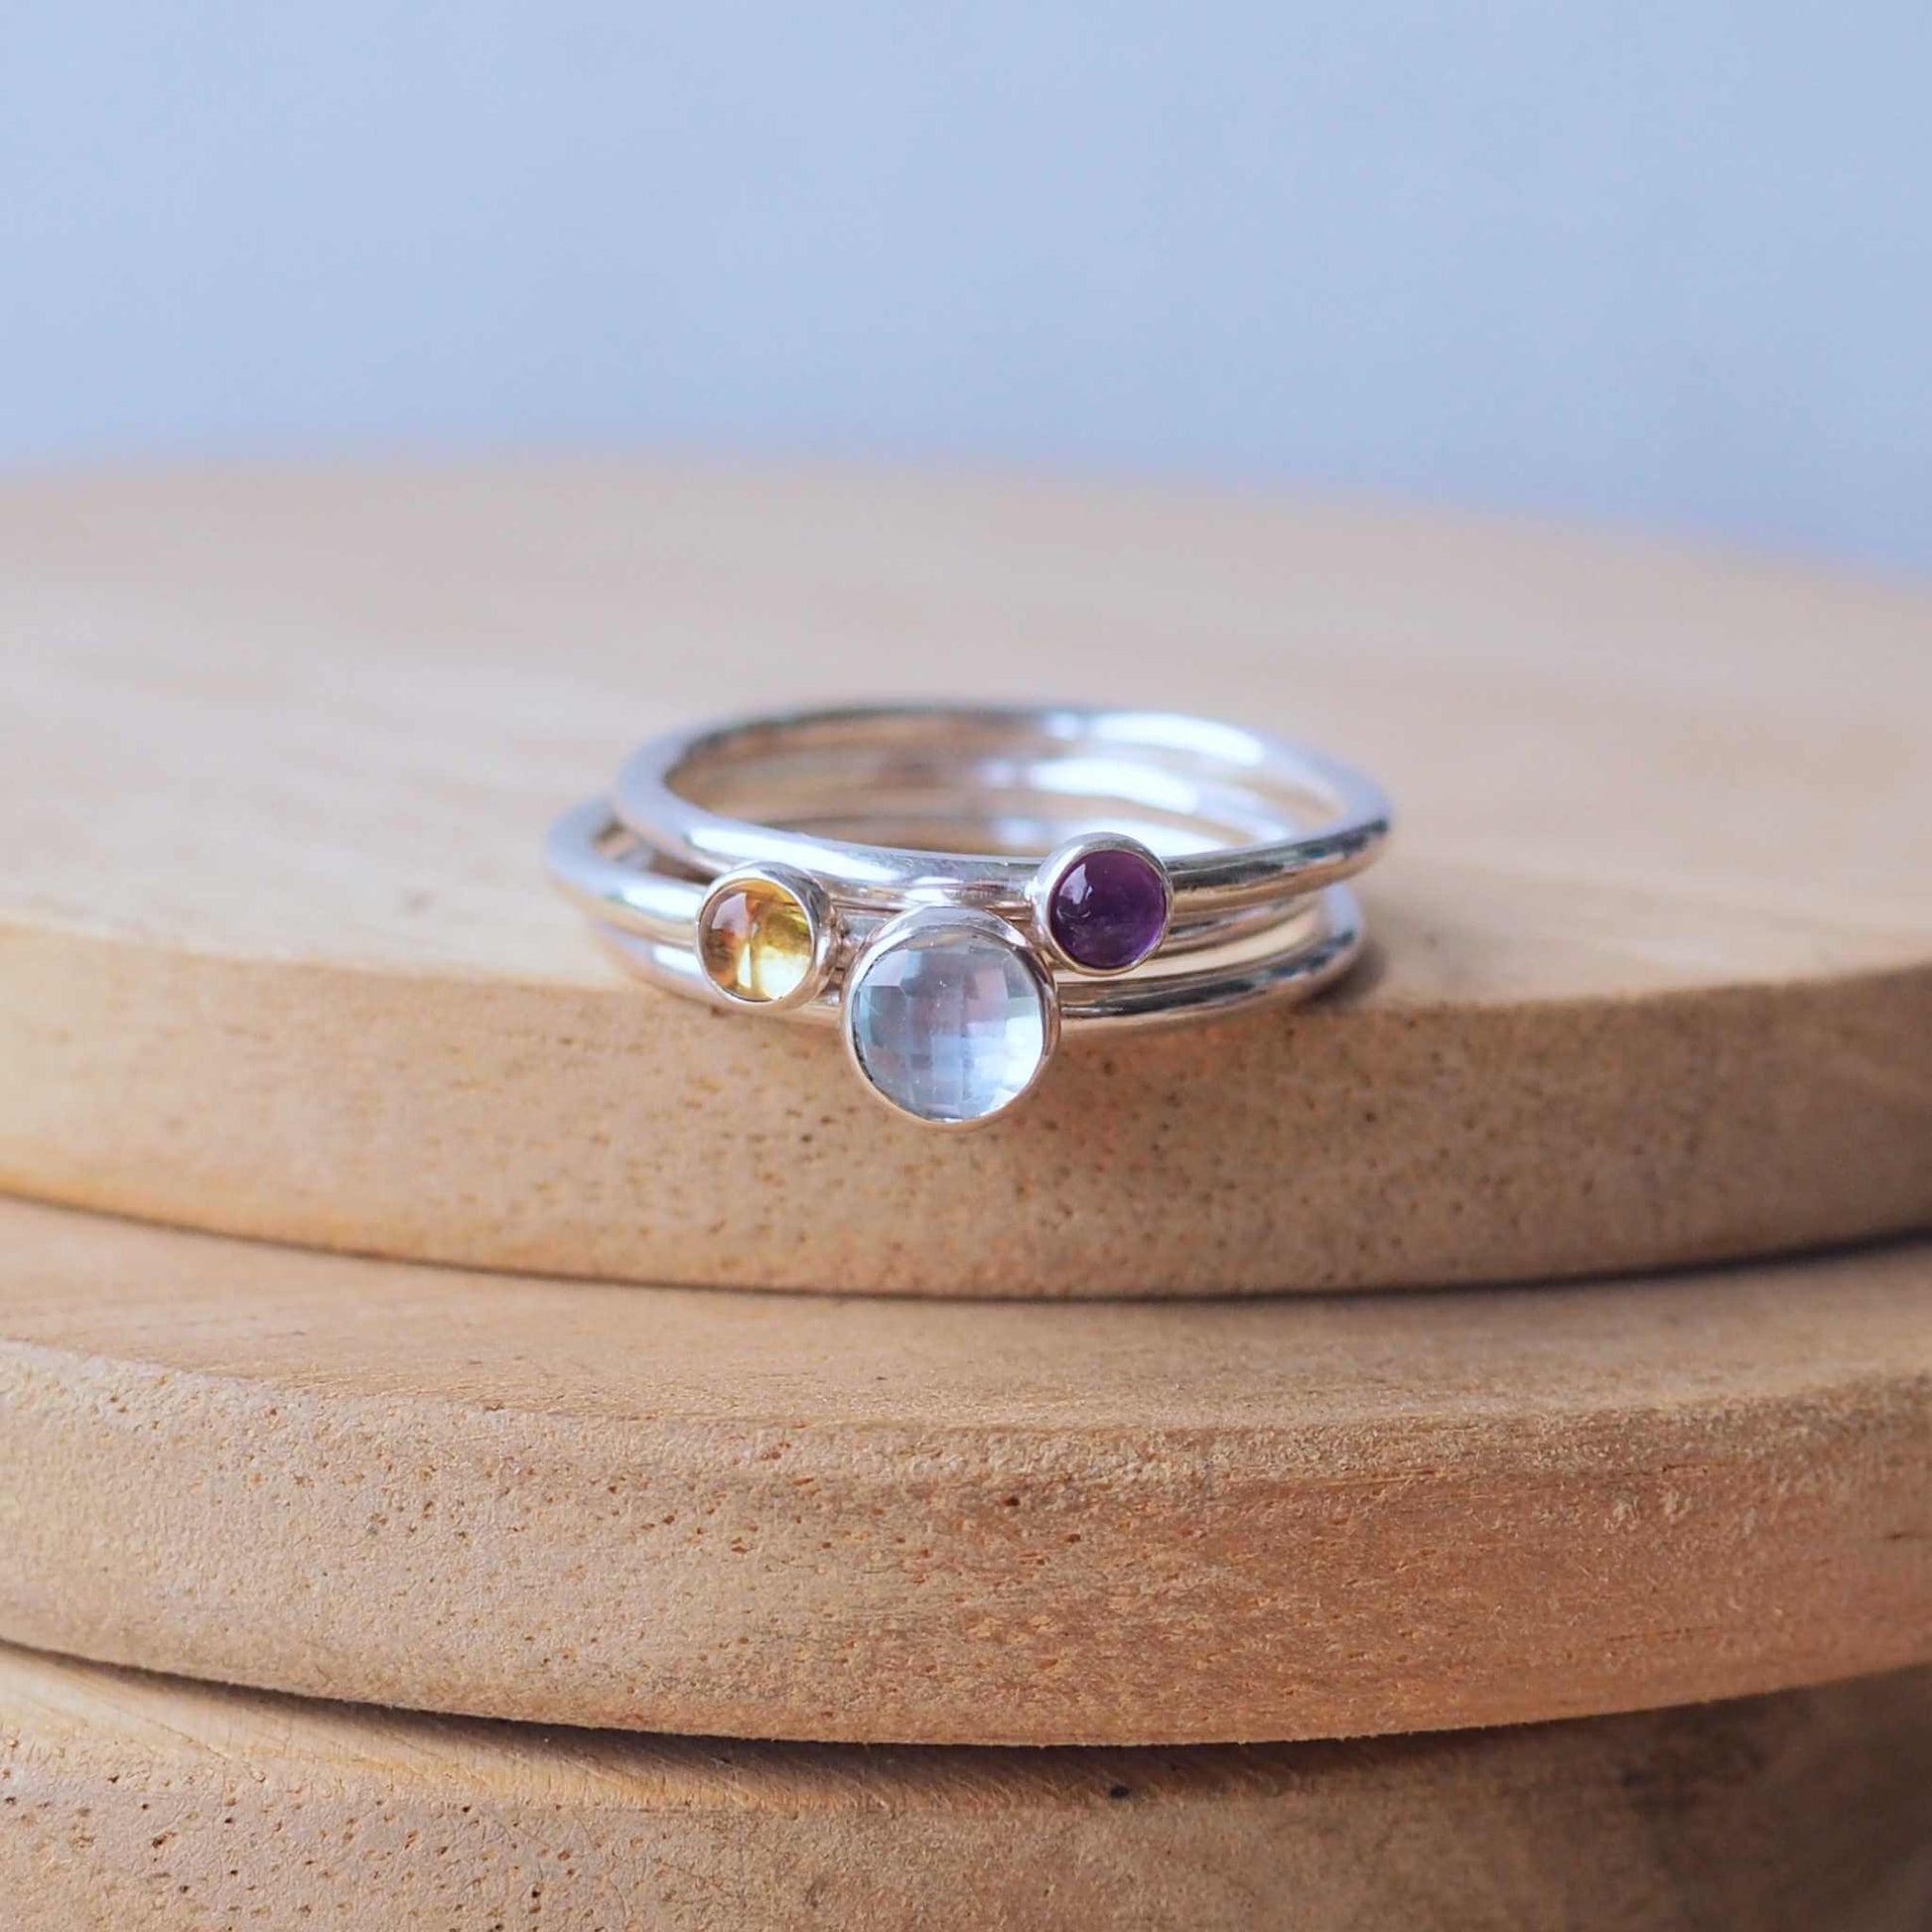 Three Birthstone RIng set with Blue Topaz, Amethyst and Citrine to mark March, February and November Birthdays. The three rings are made with Sterling SIlver and a 5mm blue round cabochon, with two further rings with 3mm round gems in a purple amethyst and yellow citrine. Handmade in Scotland by maram jewellery